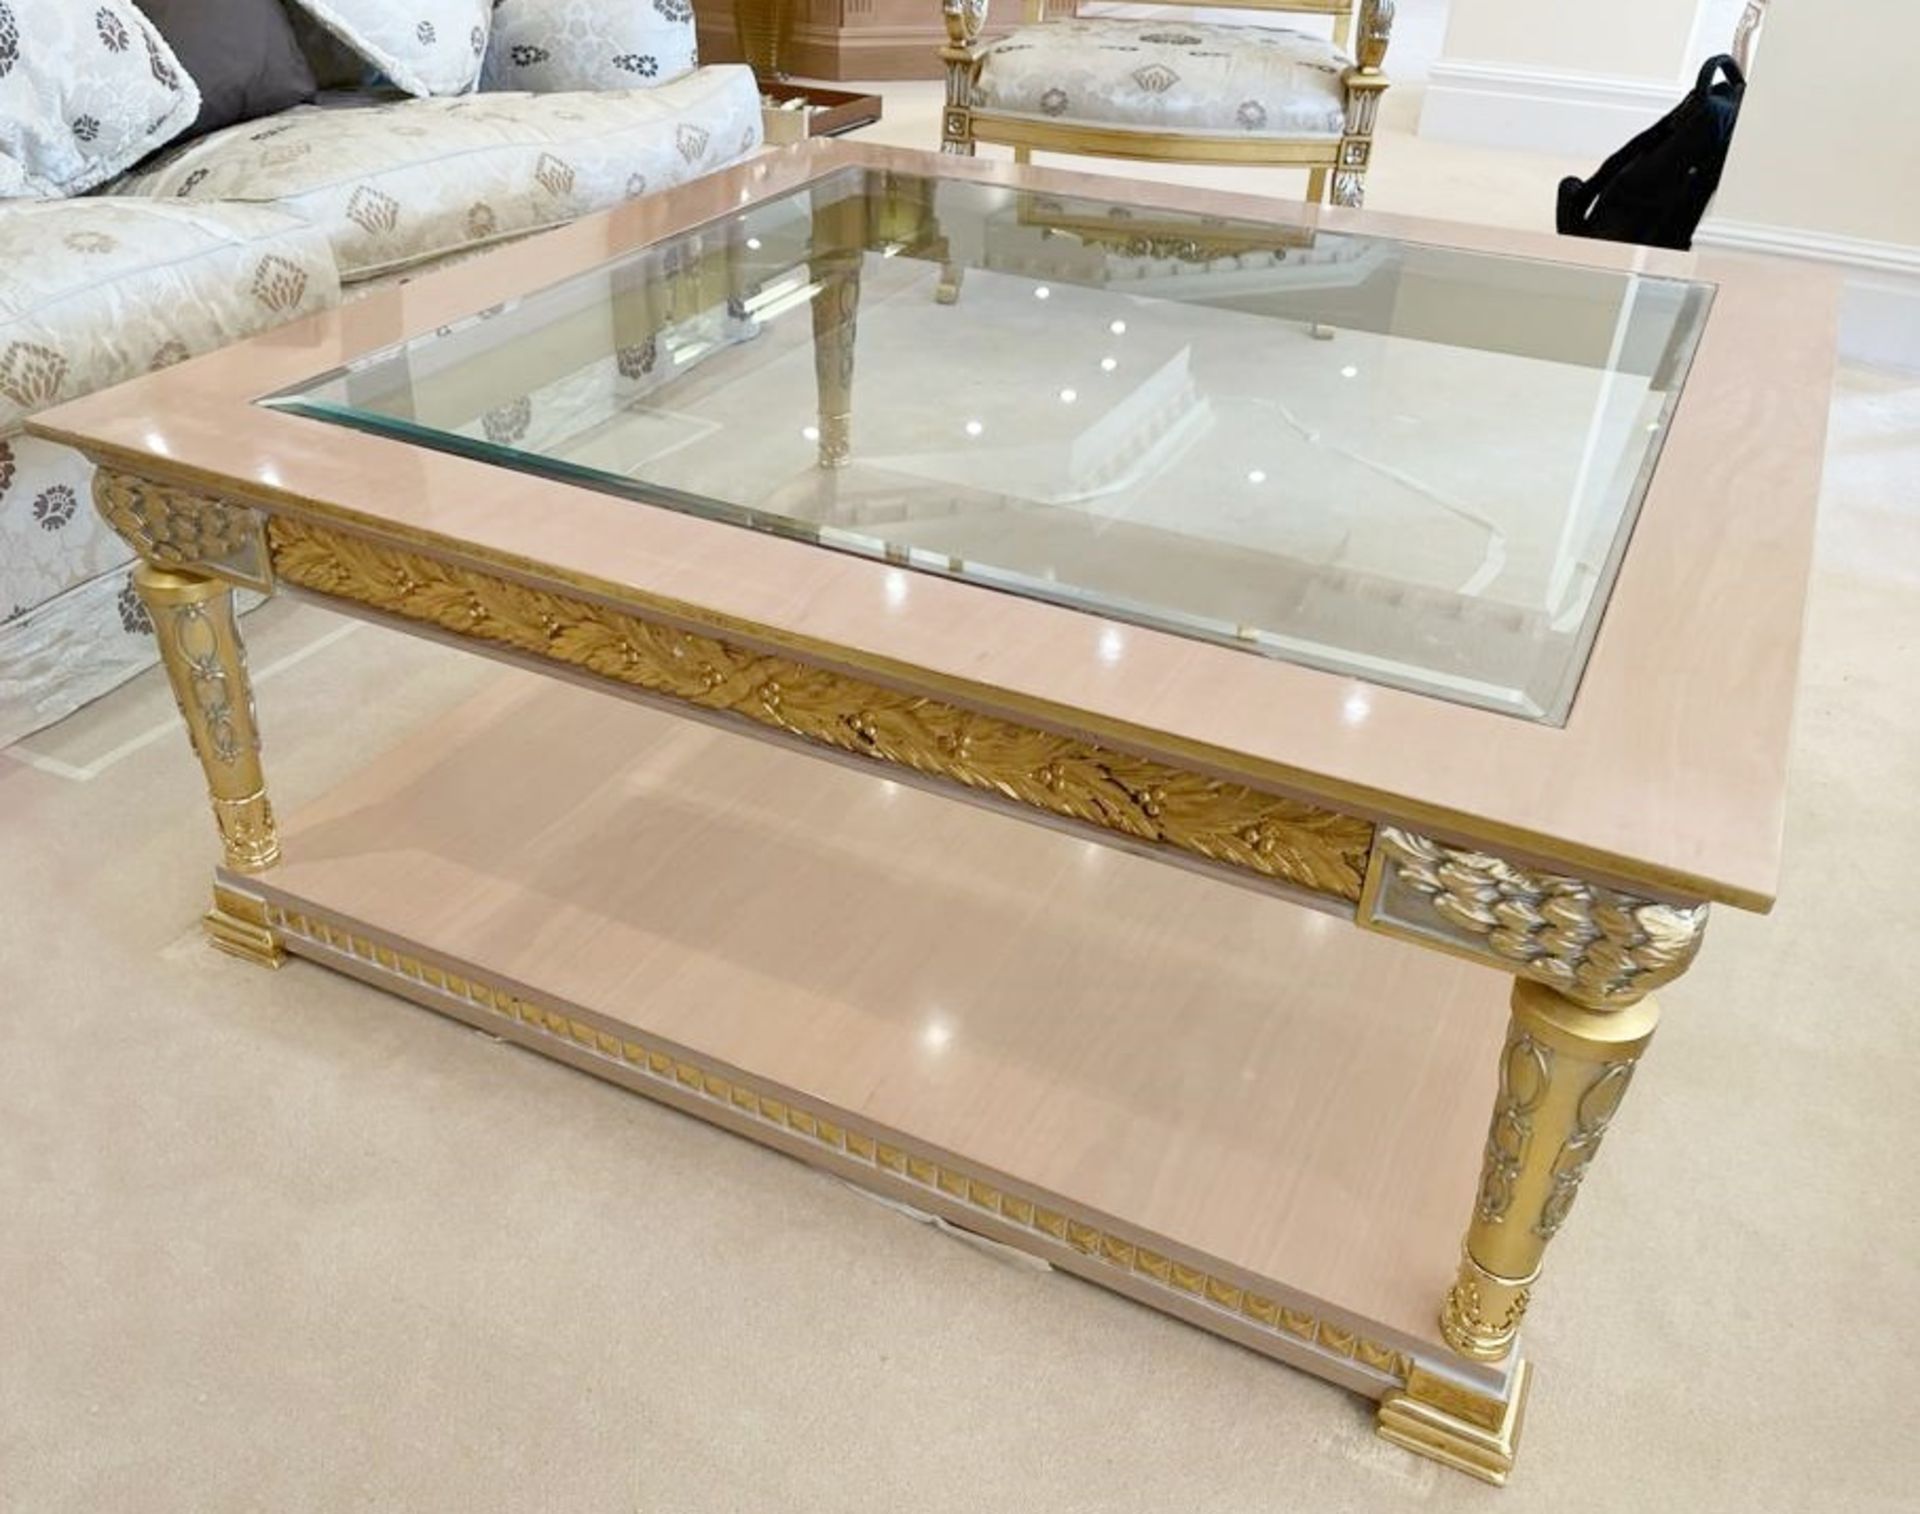 1 x Hand Carved Coffee Table Complimented With Birchwood Veneer, Golden Pillar Legs, Carved Wing - Image 7 of 12